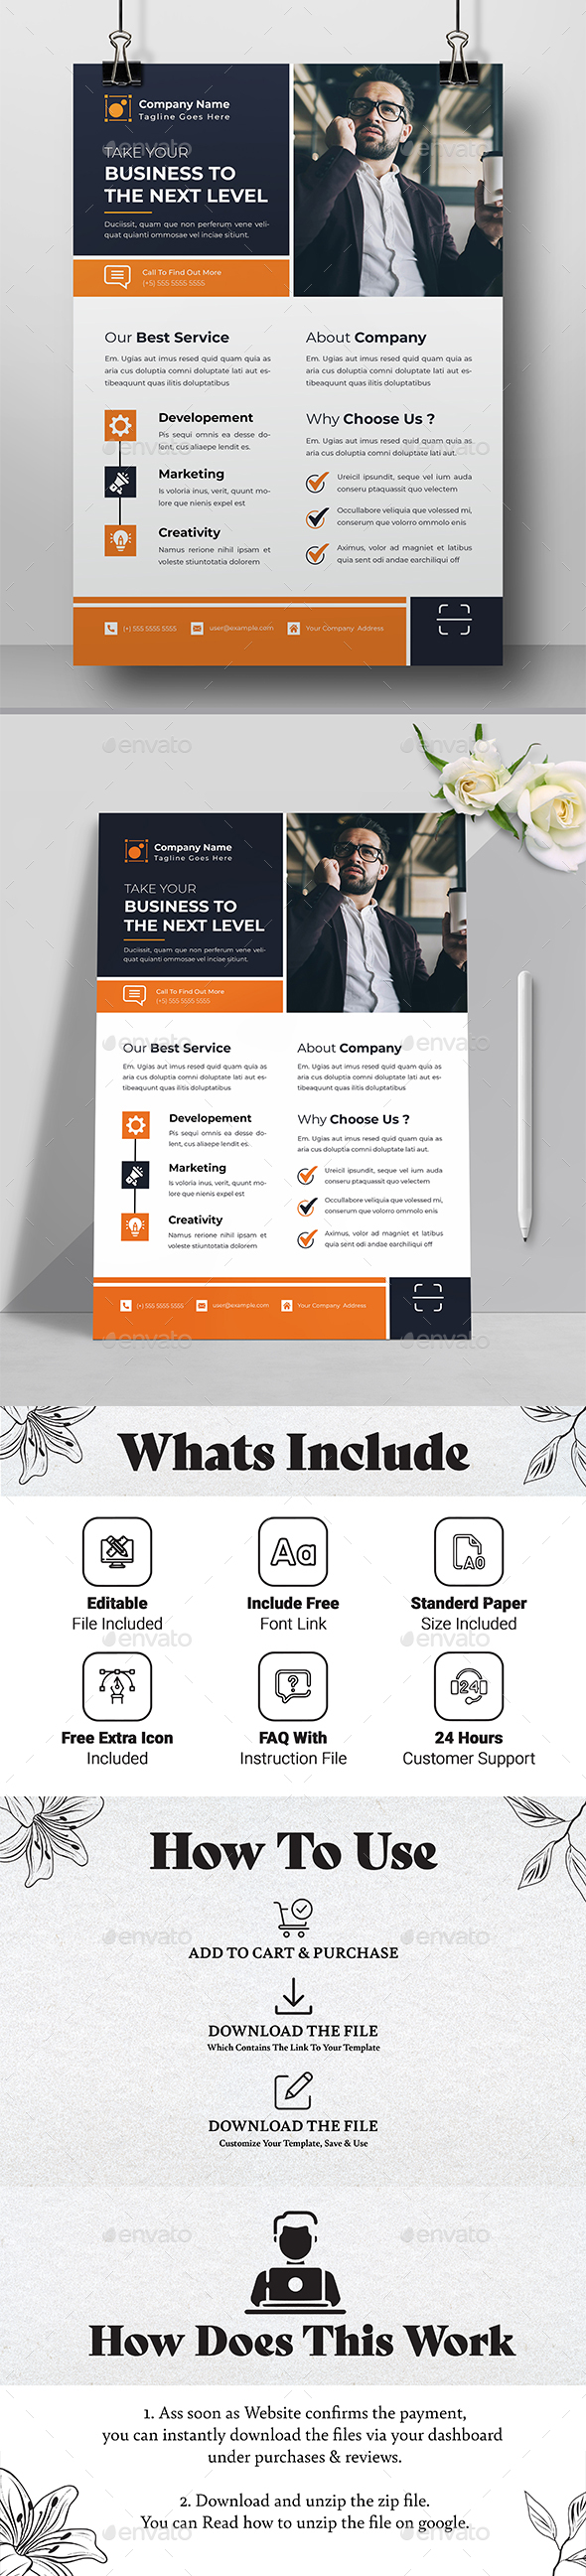 [DOWNLOAD]Business Flyer Template